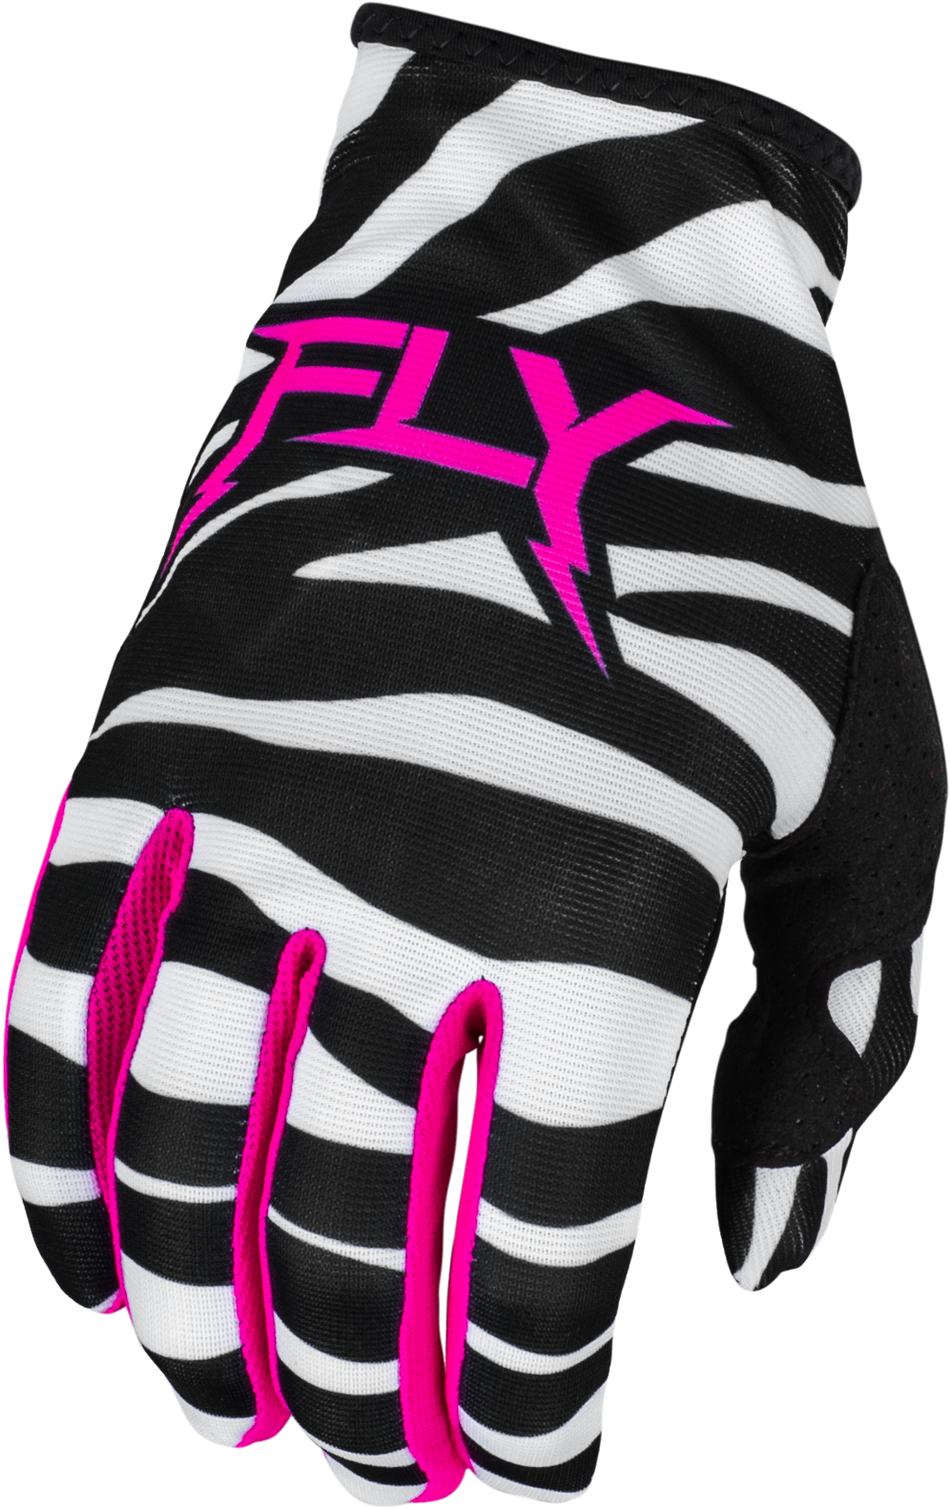 FLY RACING Lite Uncaged Gloves Black/White/Neon Pink Xs 377-741XS